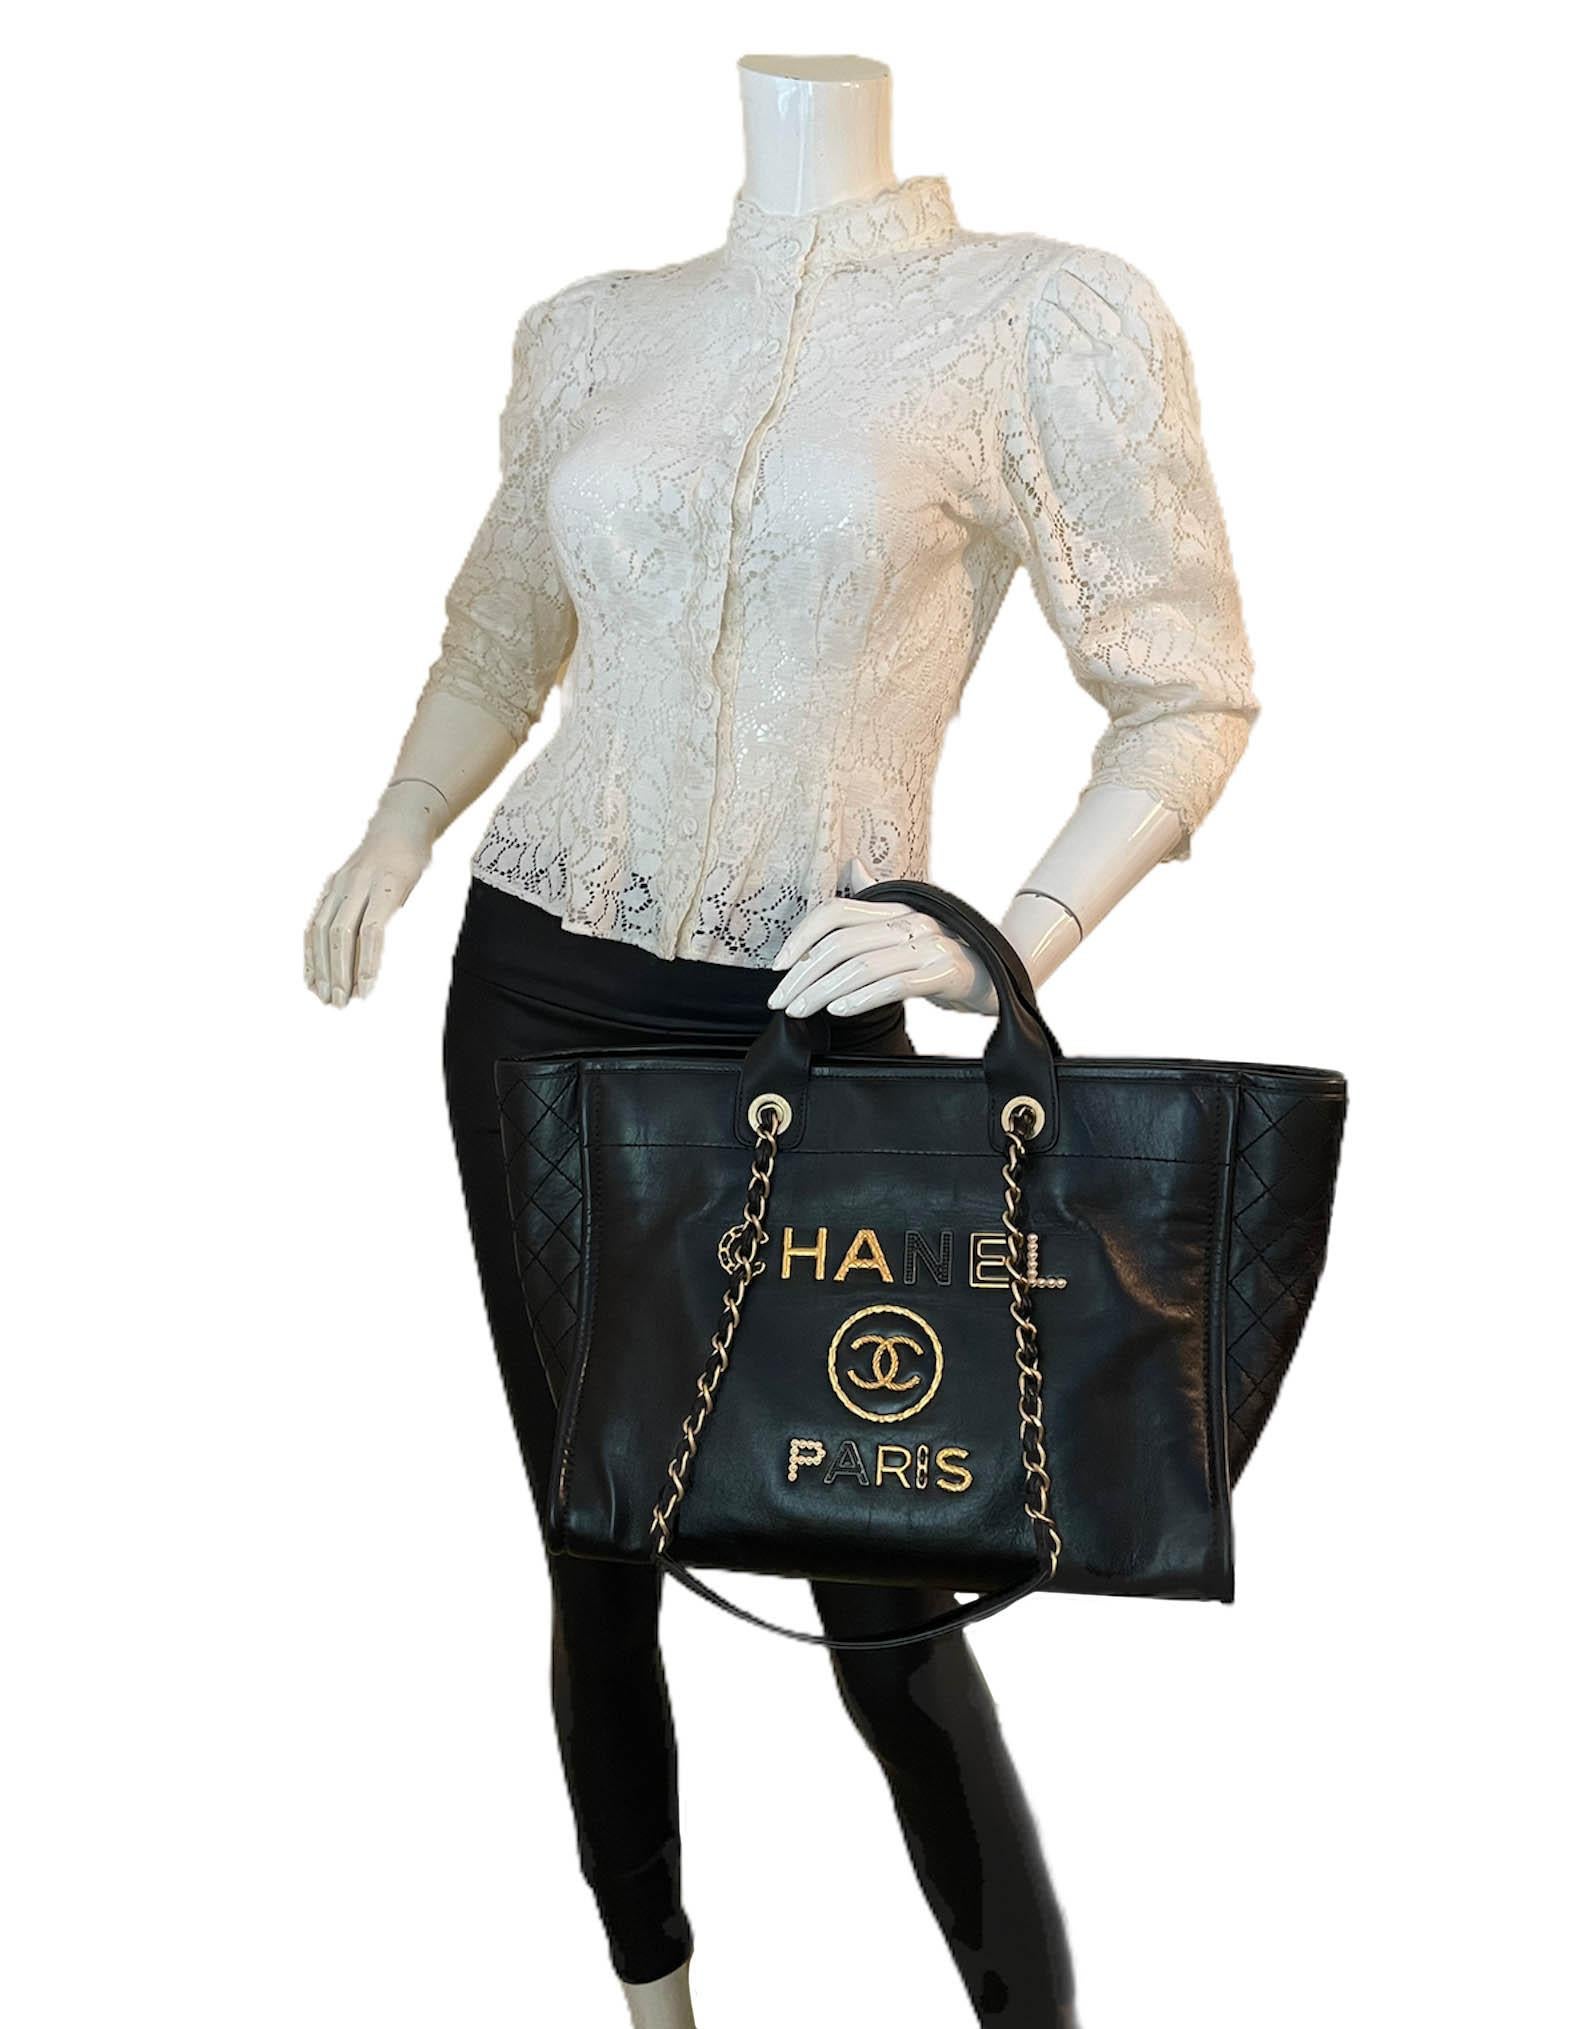 CHANEL Beige Bags & Handbags for Women, Authenticity Guaranteed